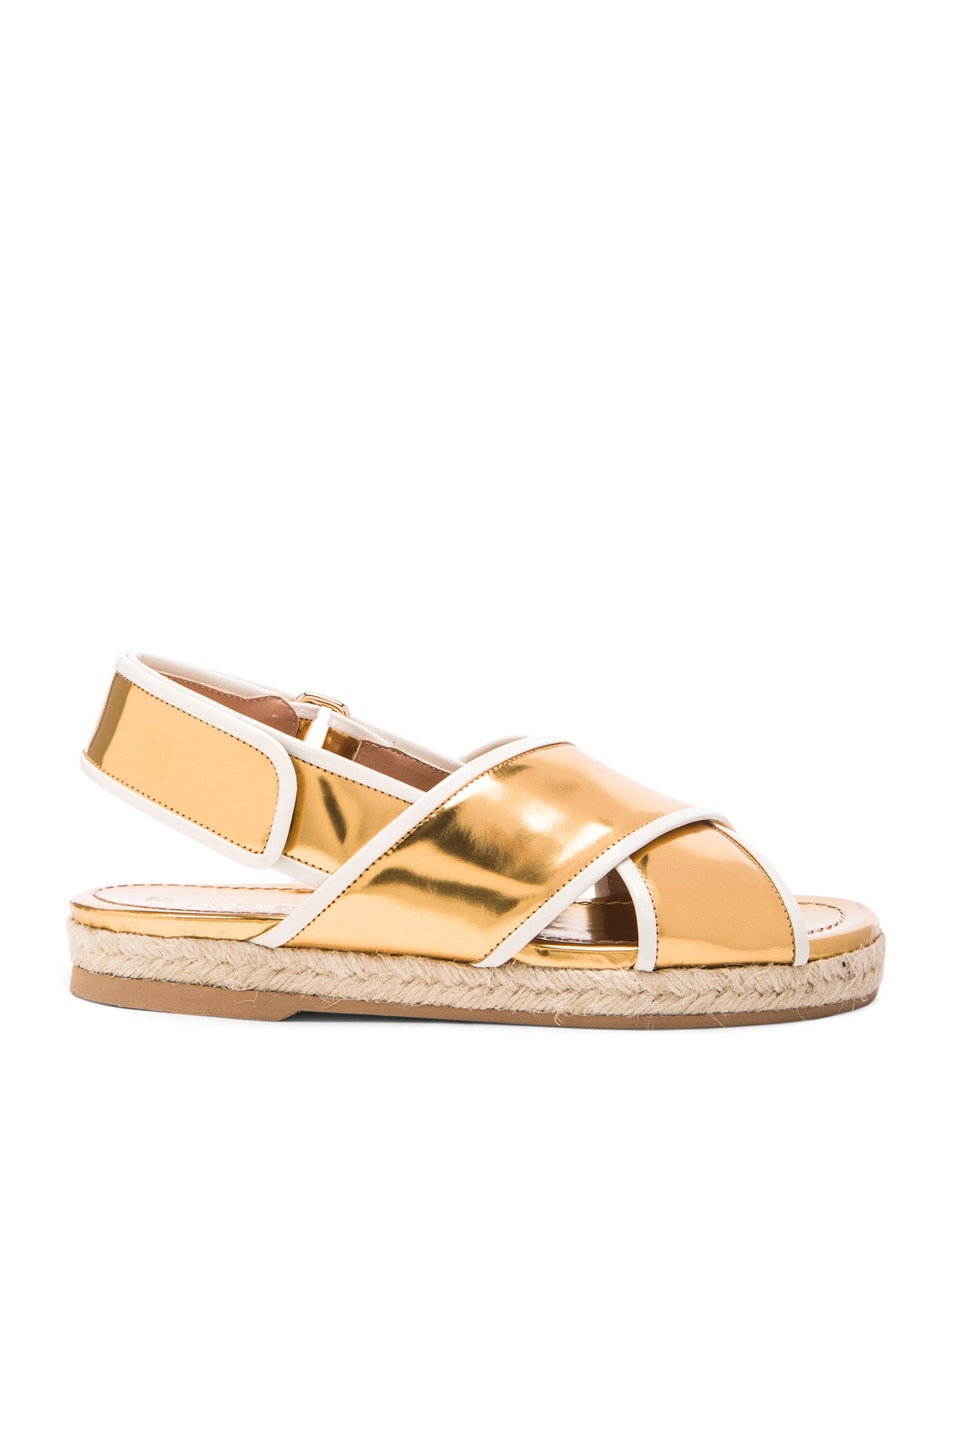 Image 1 of Marni Espadrille Patent Leather Sandals in Gold